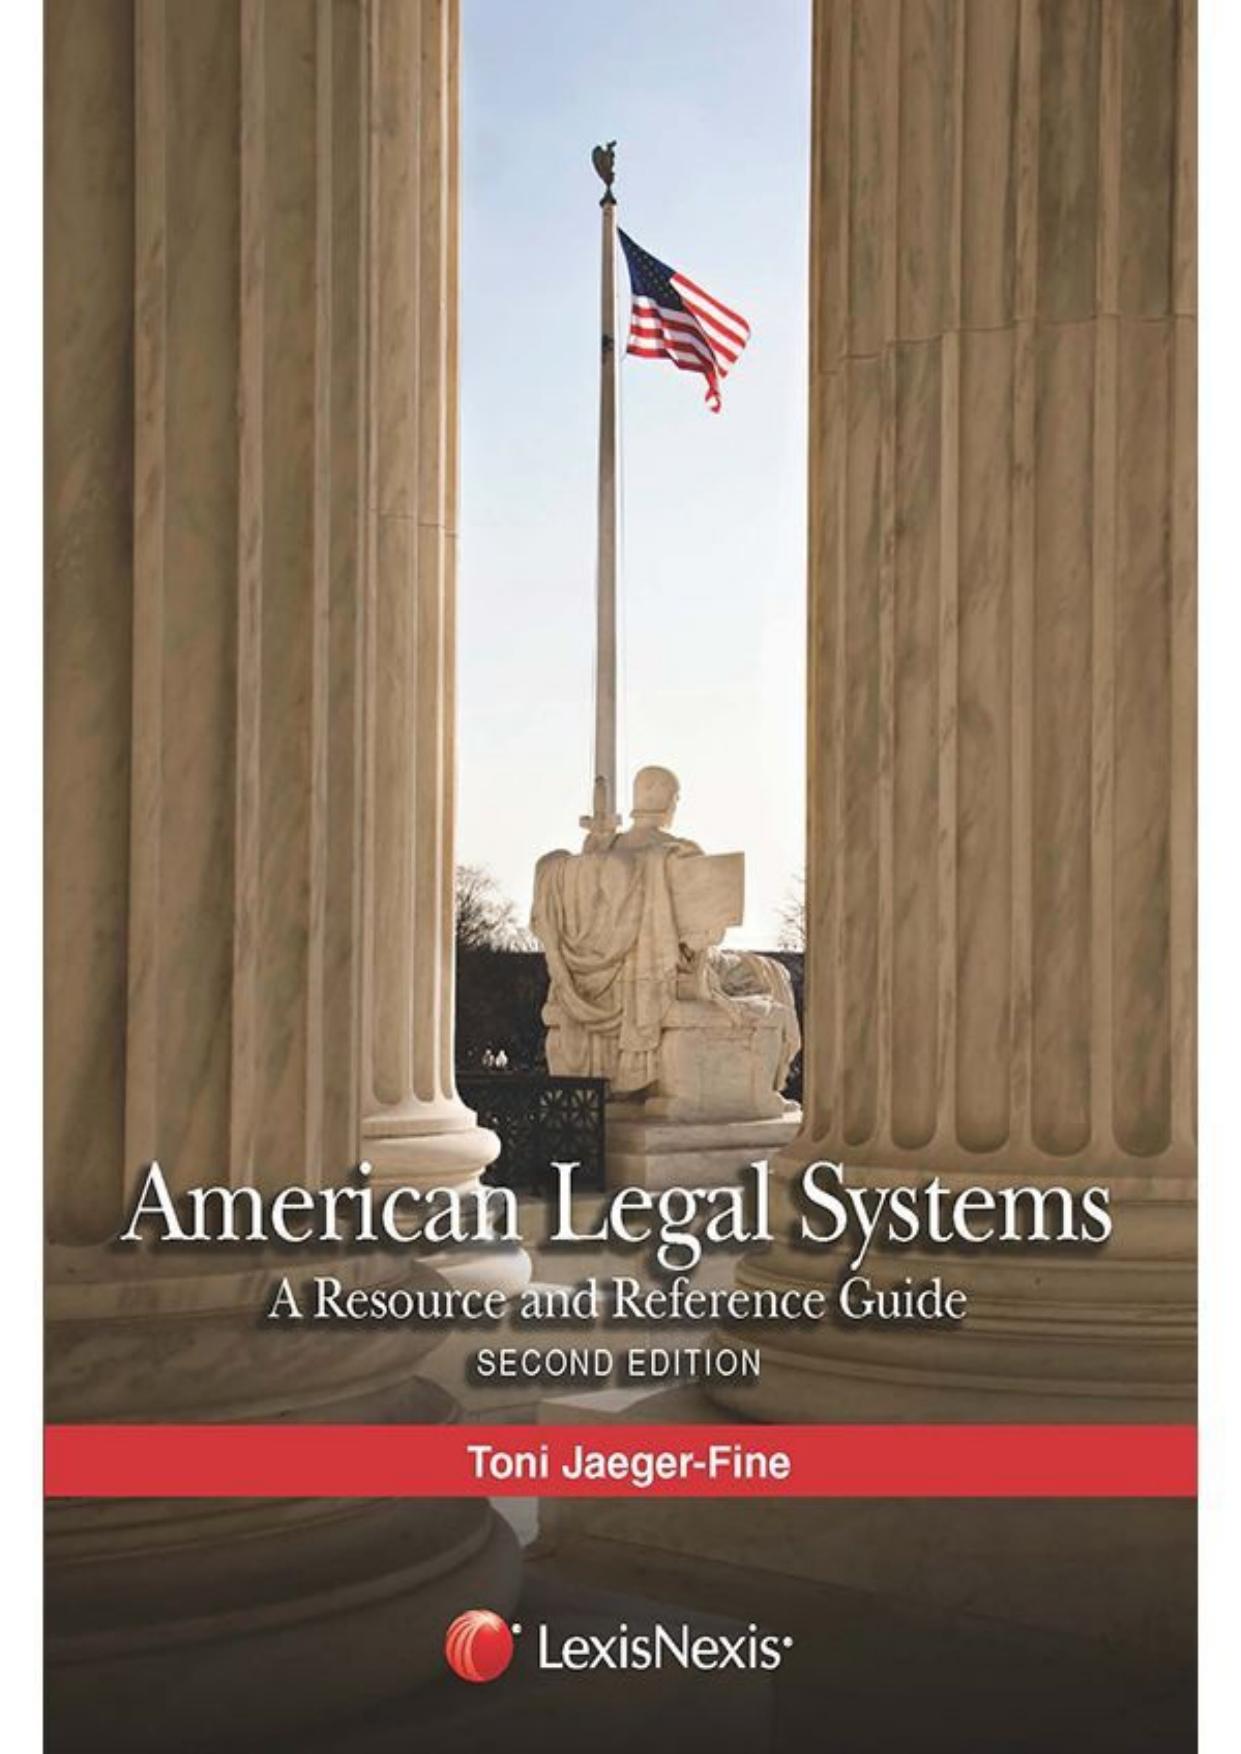 American Legal Systems_ A Resource and Reference Guide, 2015 - Toni Jaeger-Fine.jpg